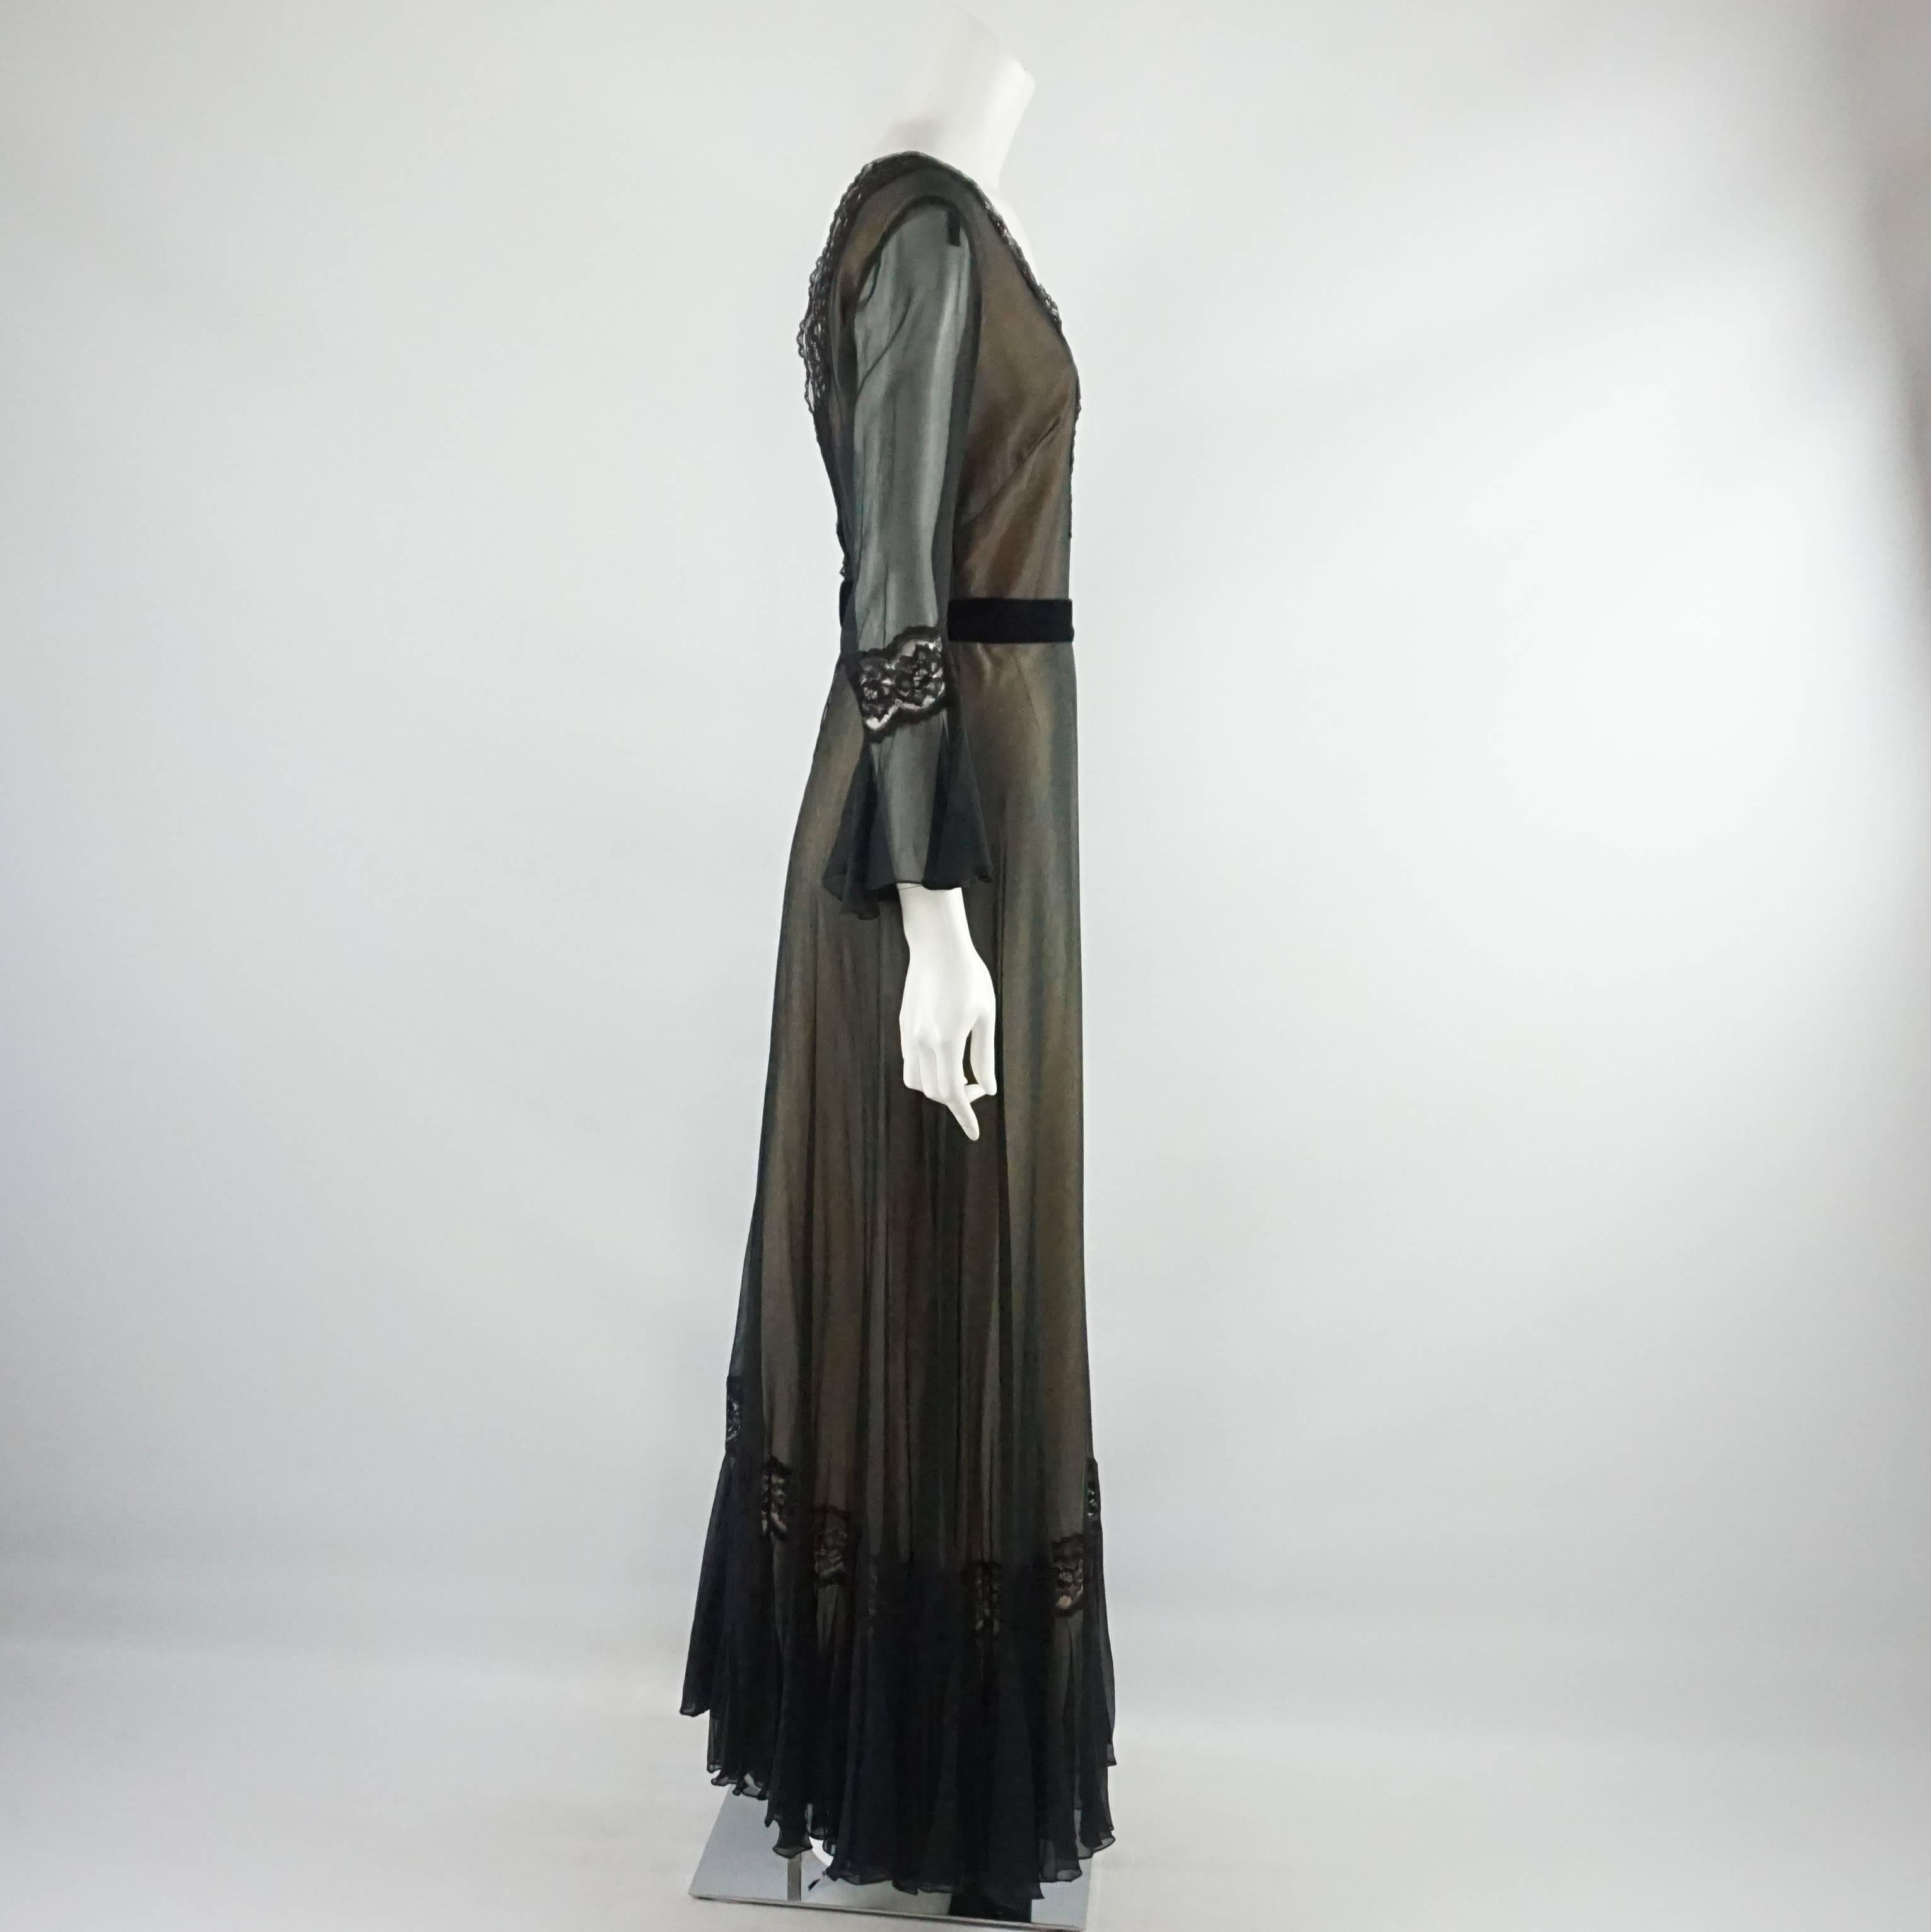 This Jean Allen gown is long sleeved with a v-neck. It is silk with a lacy trim on the neck and sheer sleeves. There is a waist band and lace detailing on the sleeves. This gown is in excellent condition. Size small, circa late